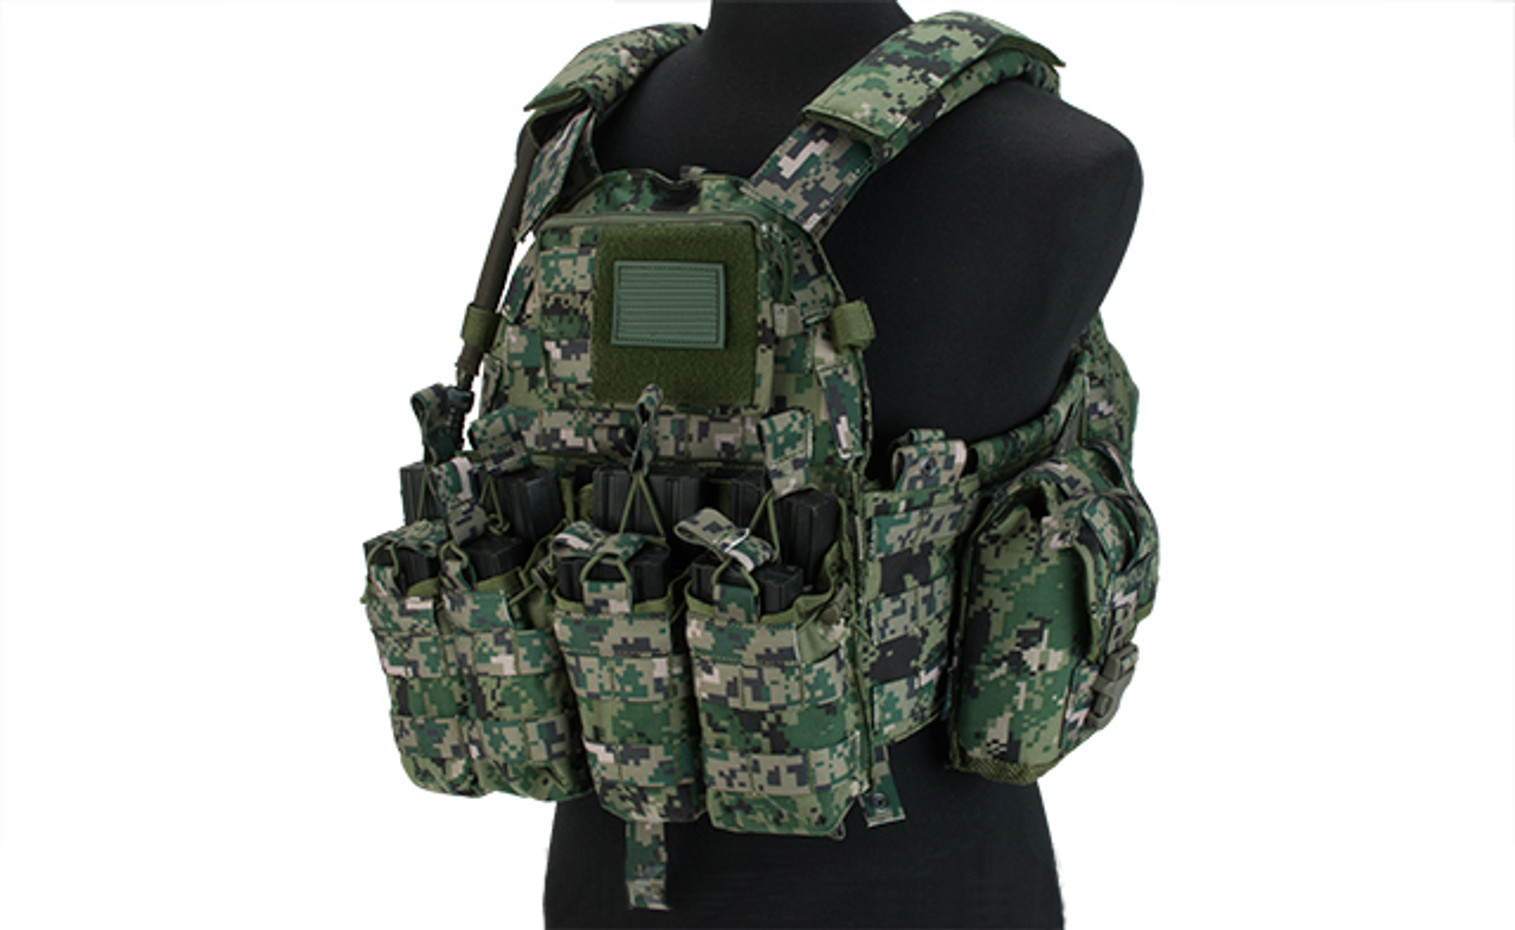 TMC 1065 Tactical Plate Carrier Set with Set of 7 Pouches - Digital Woodland